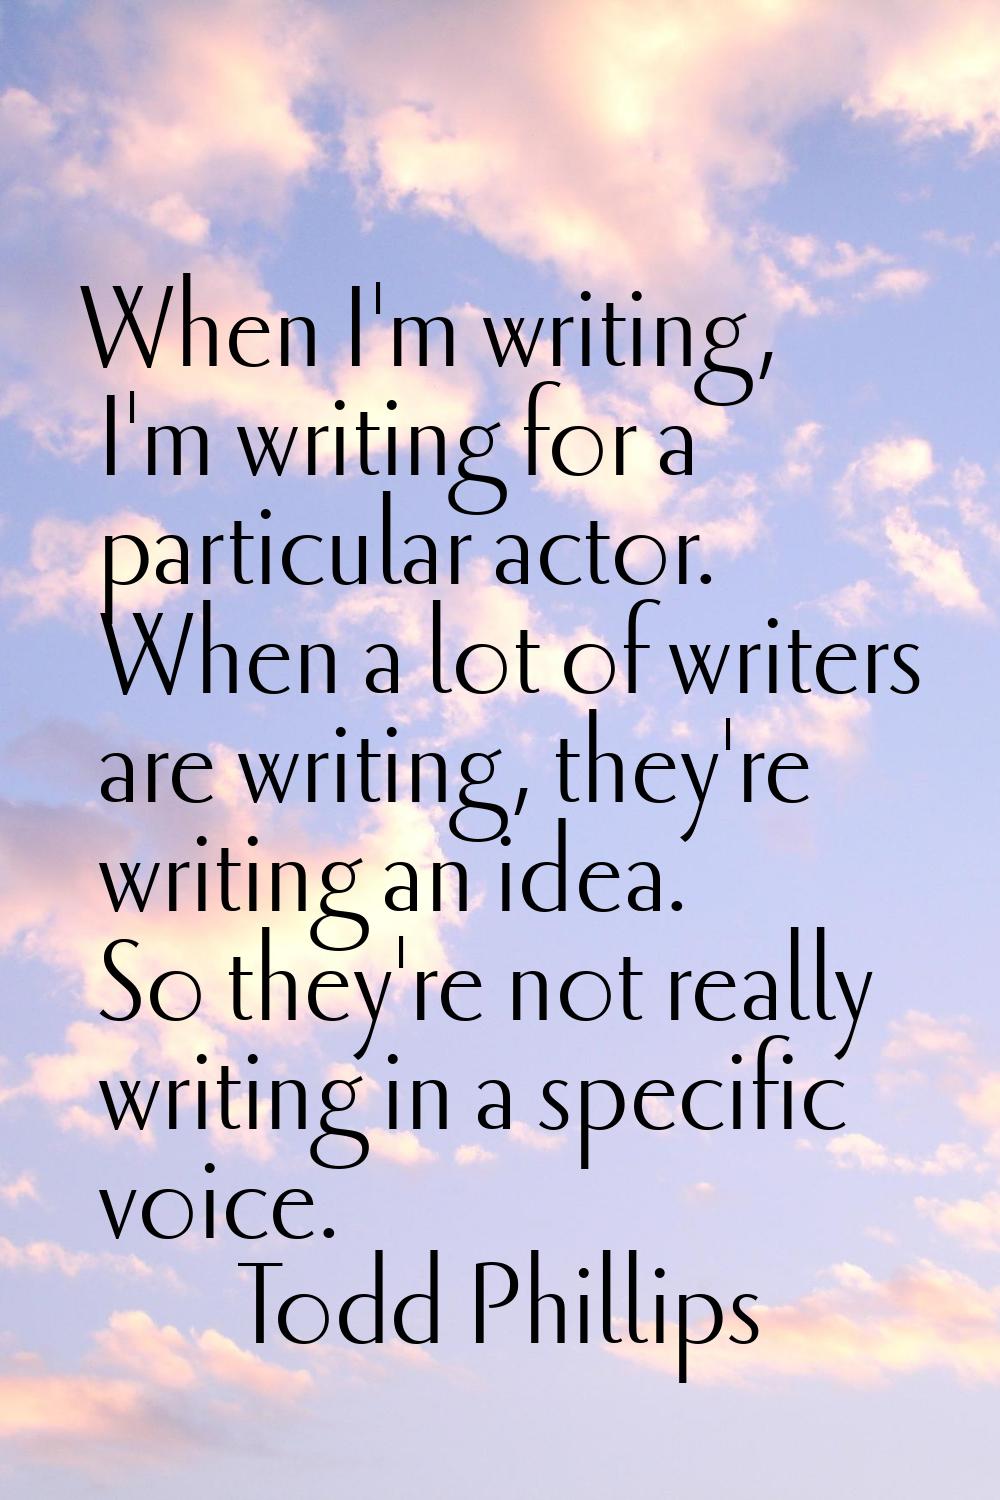 When I'm writing, I'm writing for a particular actor. When a lot of writers are writing, they're wr